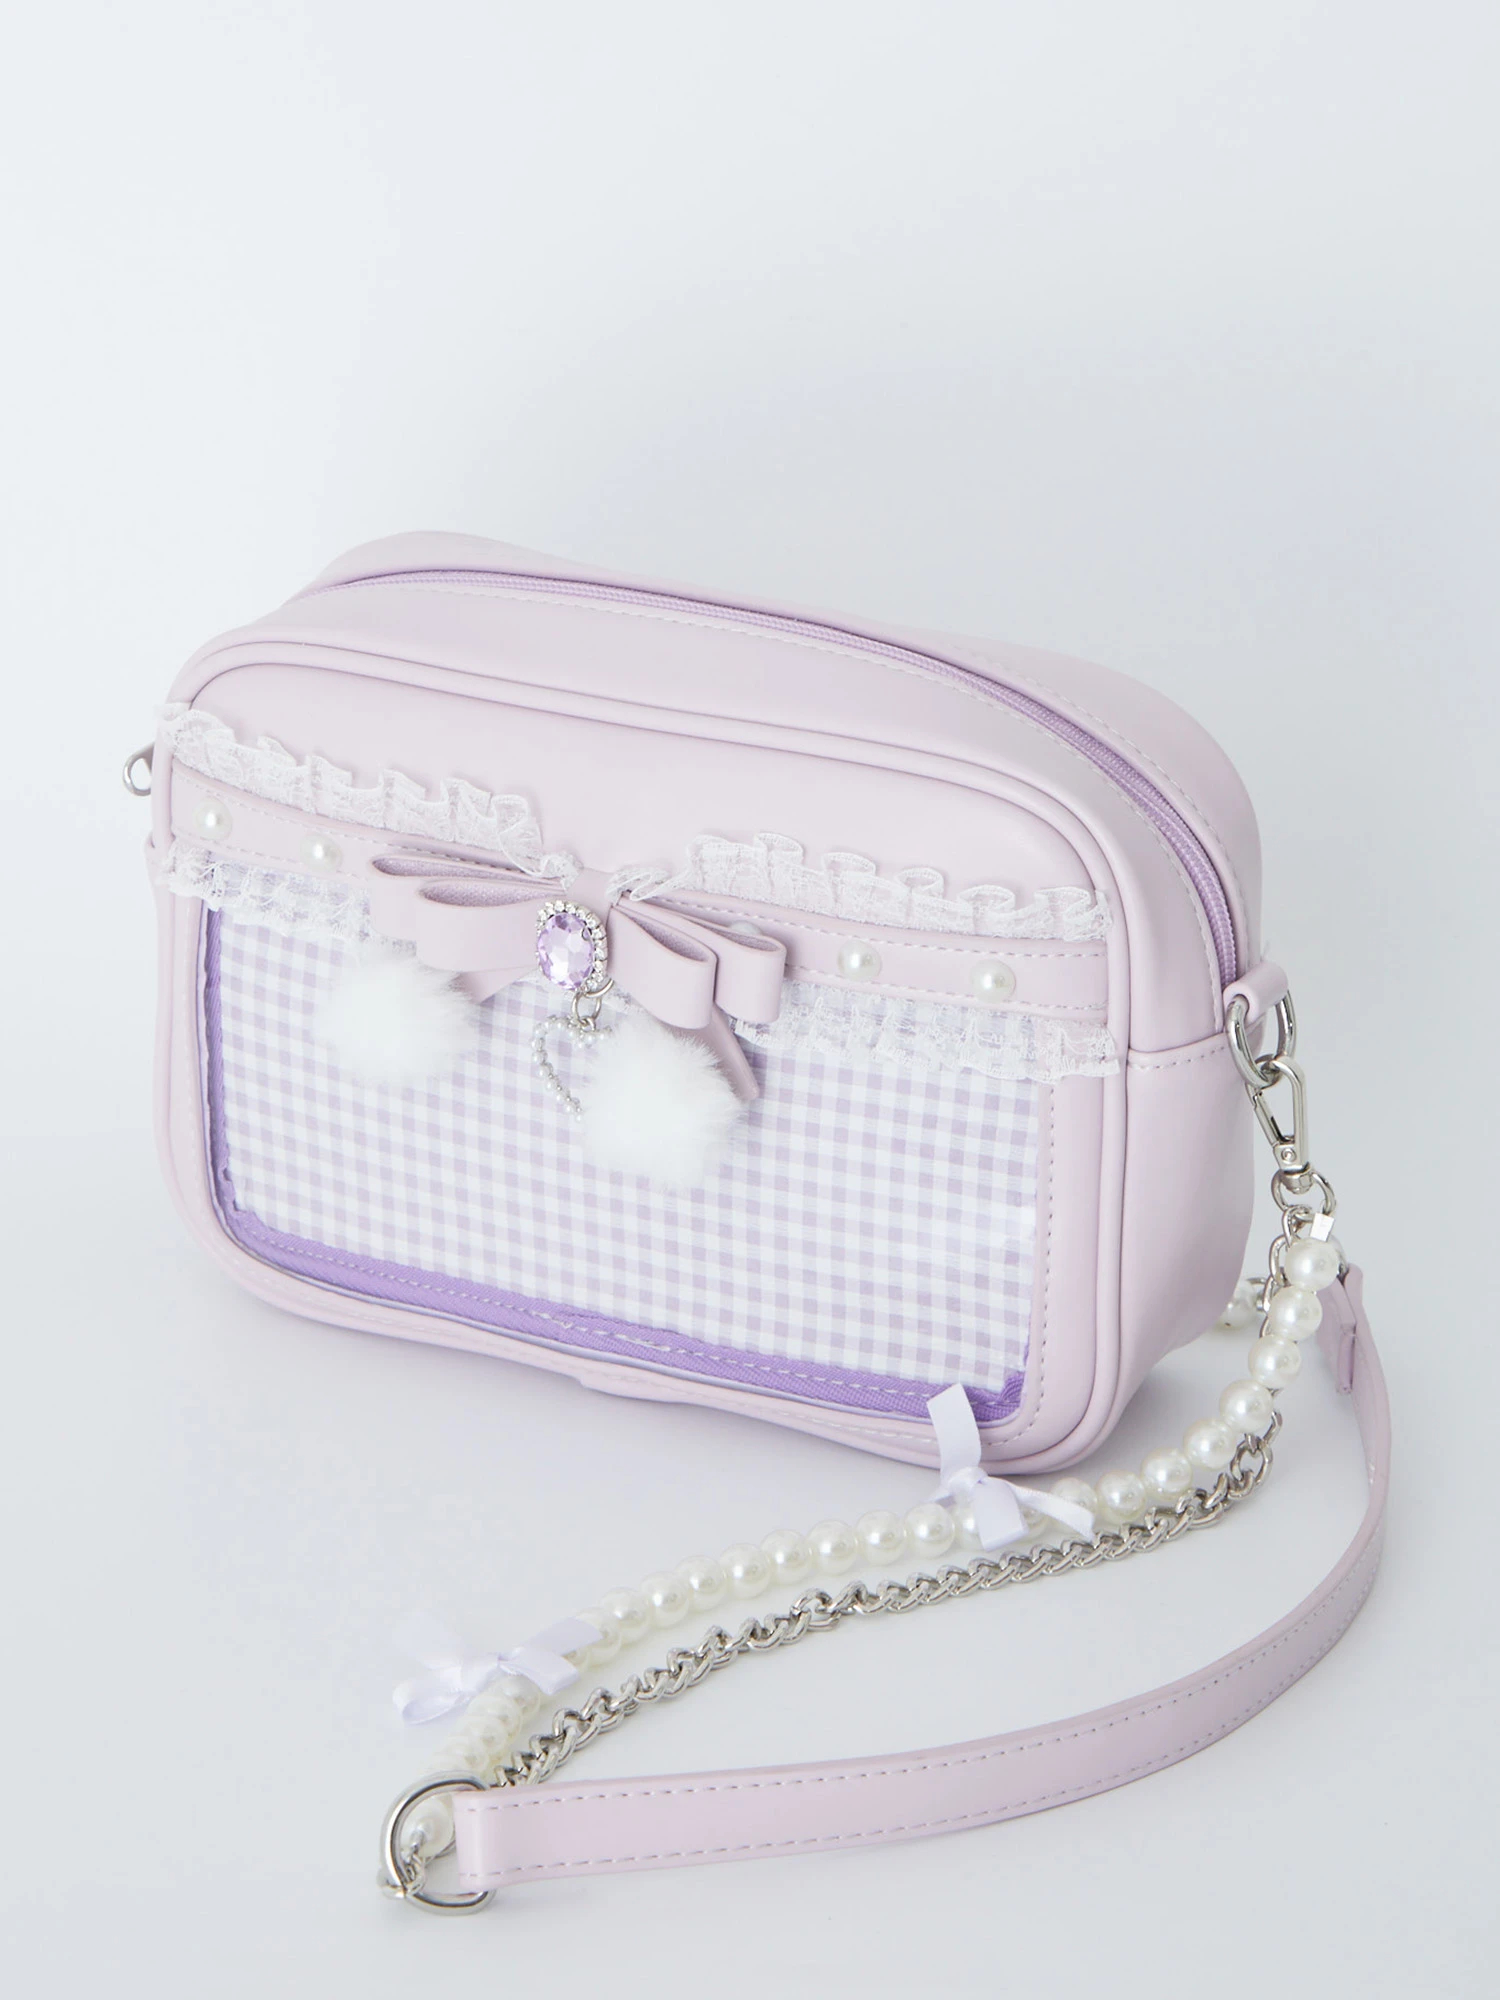 Ank Rouge 確定ファンサのおまじないbag レッド